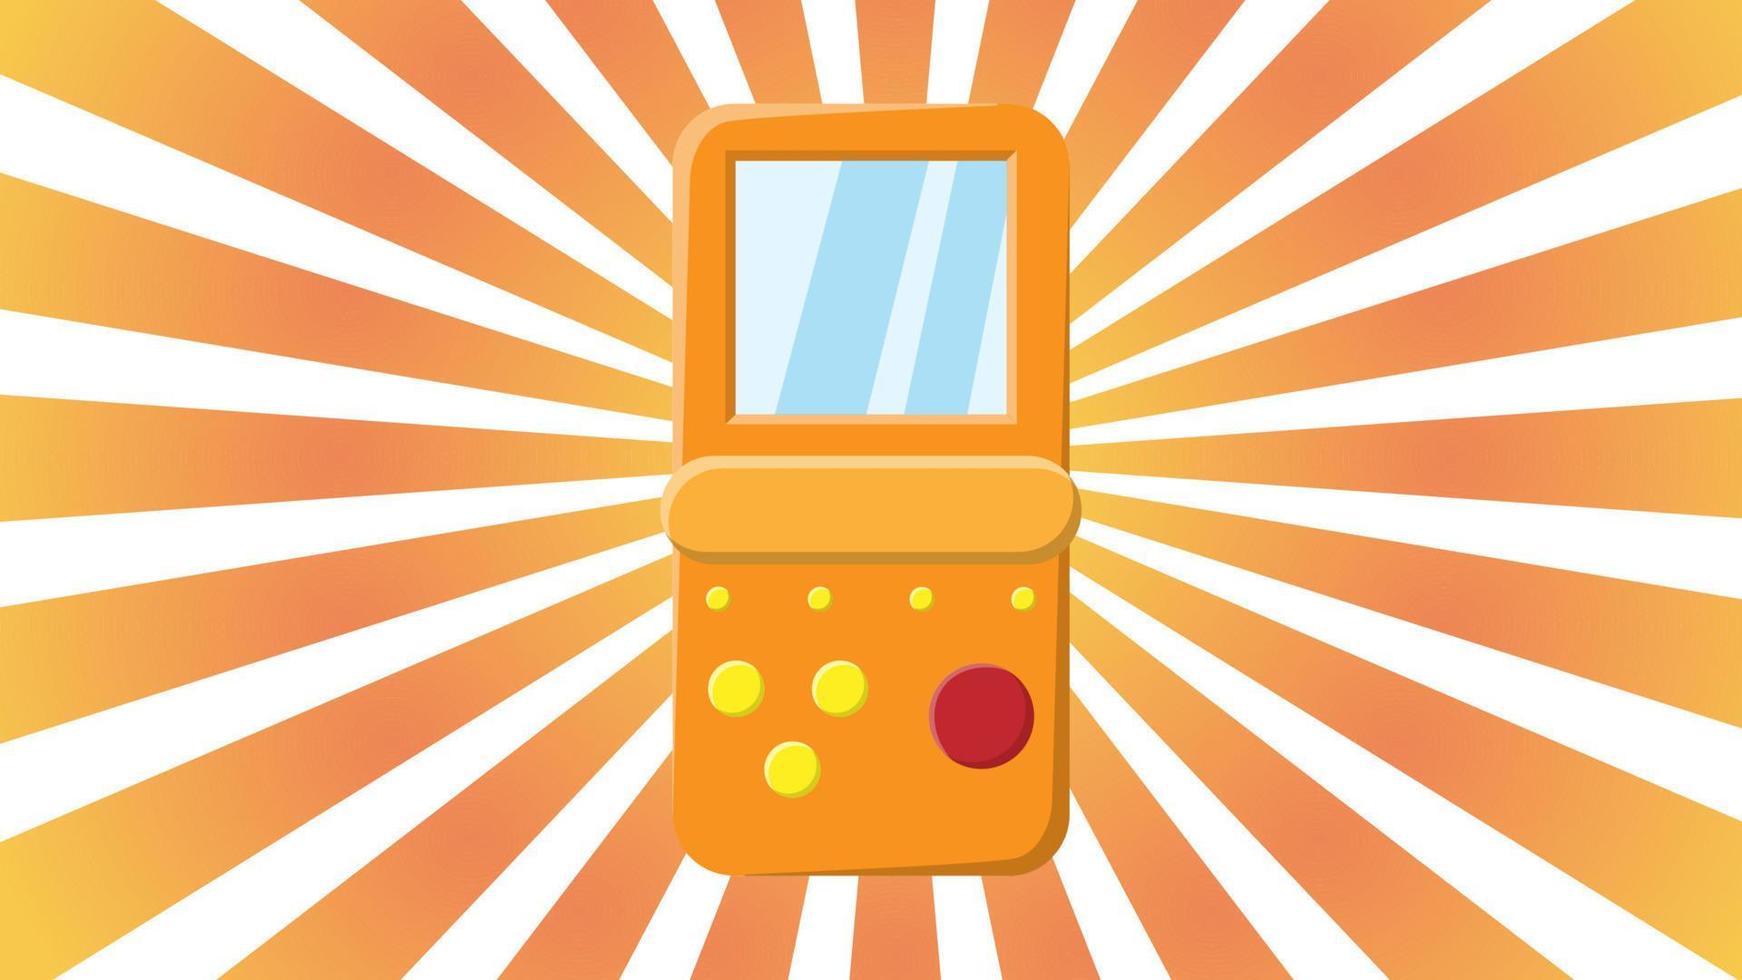 Old retro vintage hipster handheld game console with screen and buttons from 70s, 80s, 90s against the background of the orange rays of the sun. Vector illustration